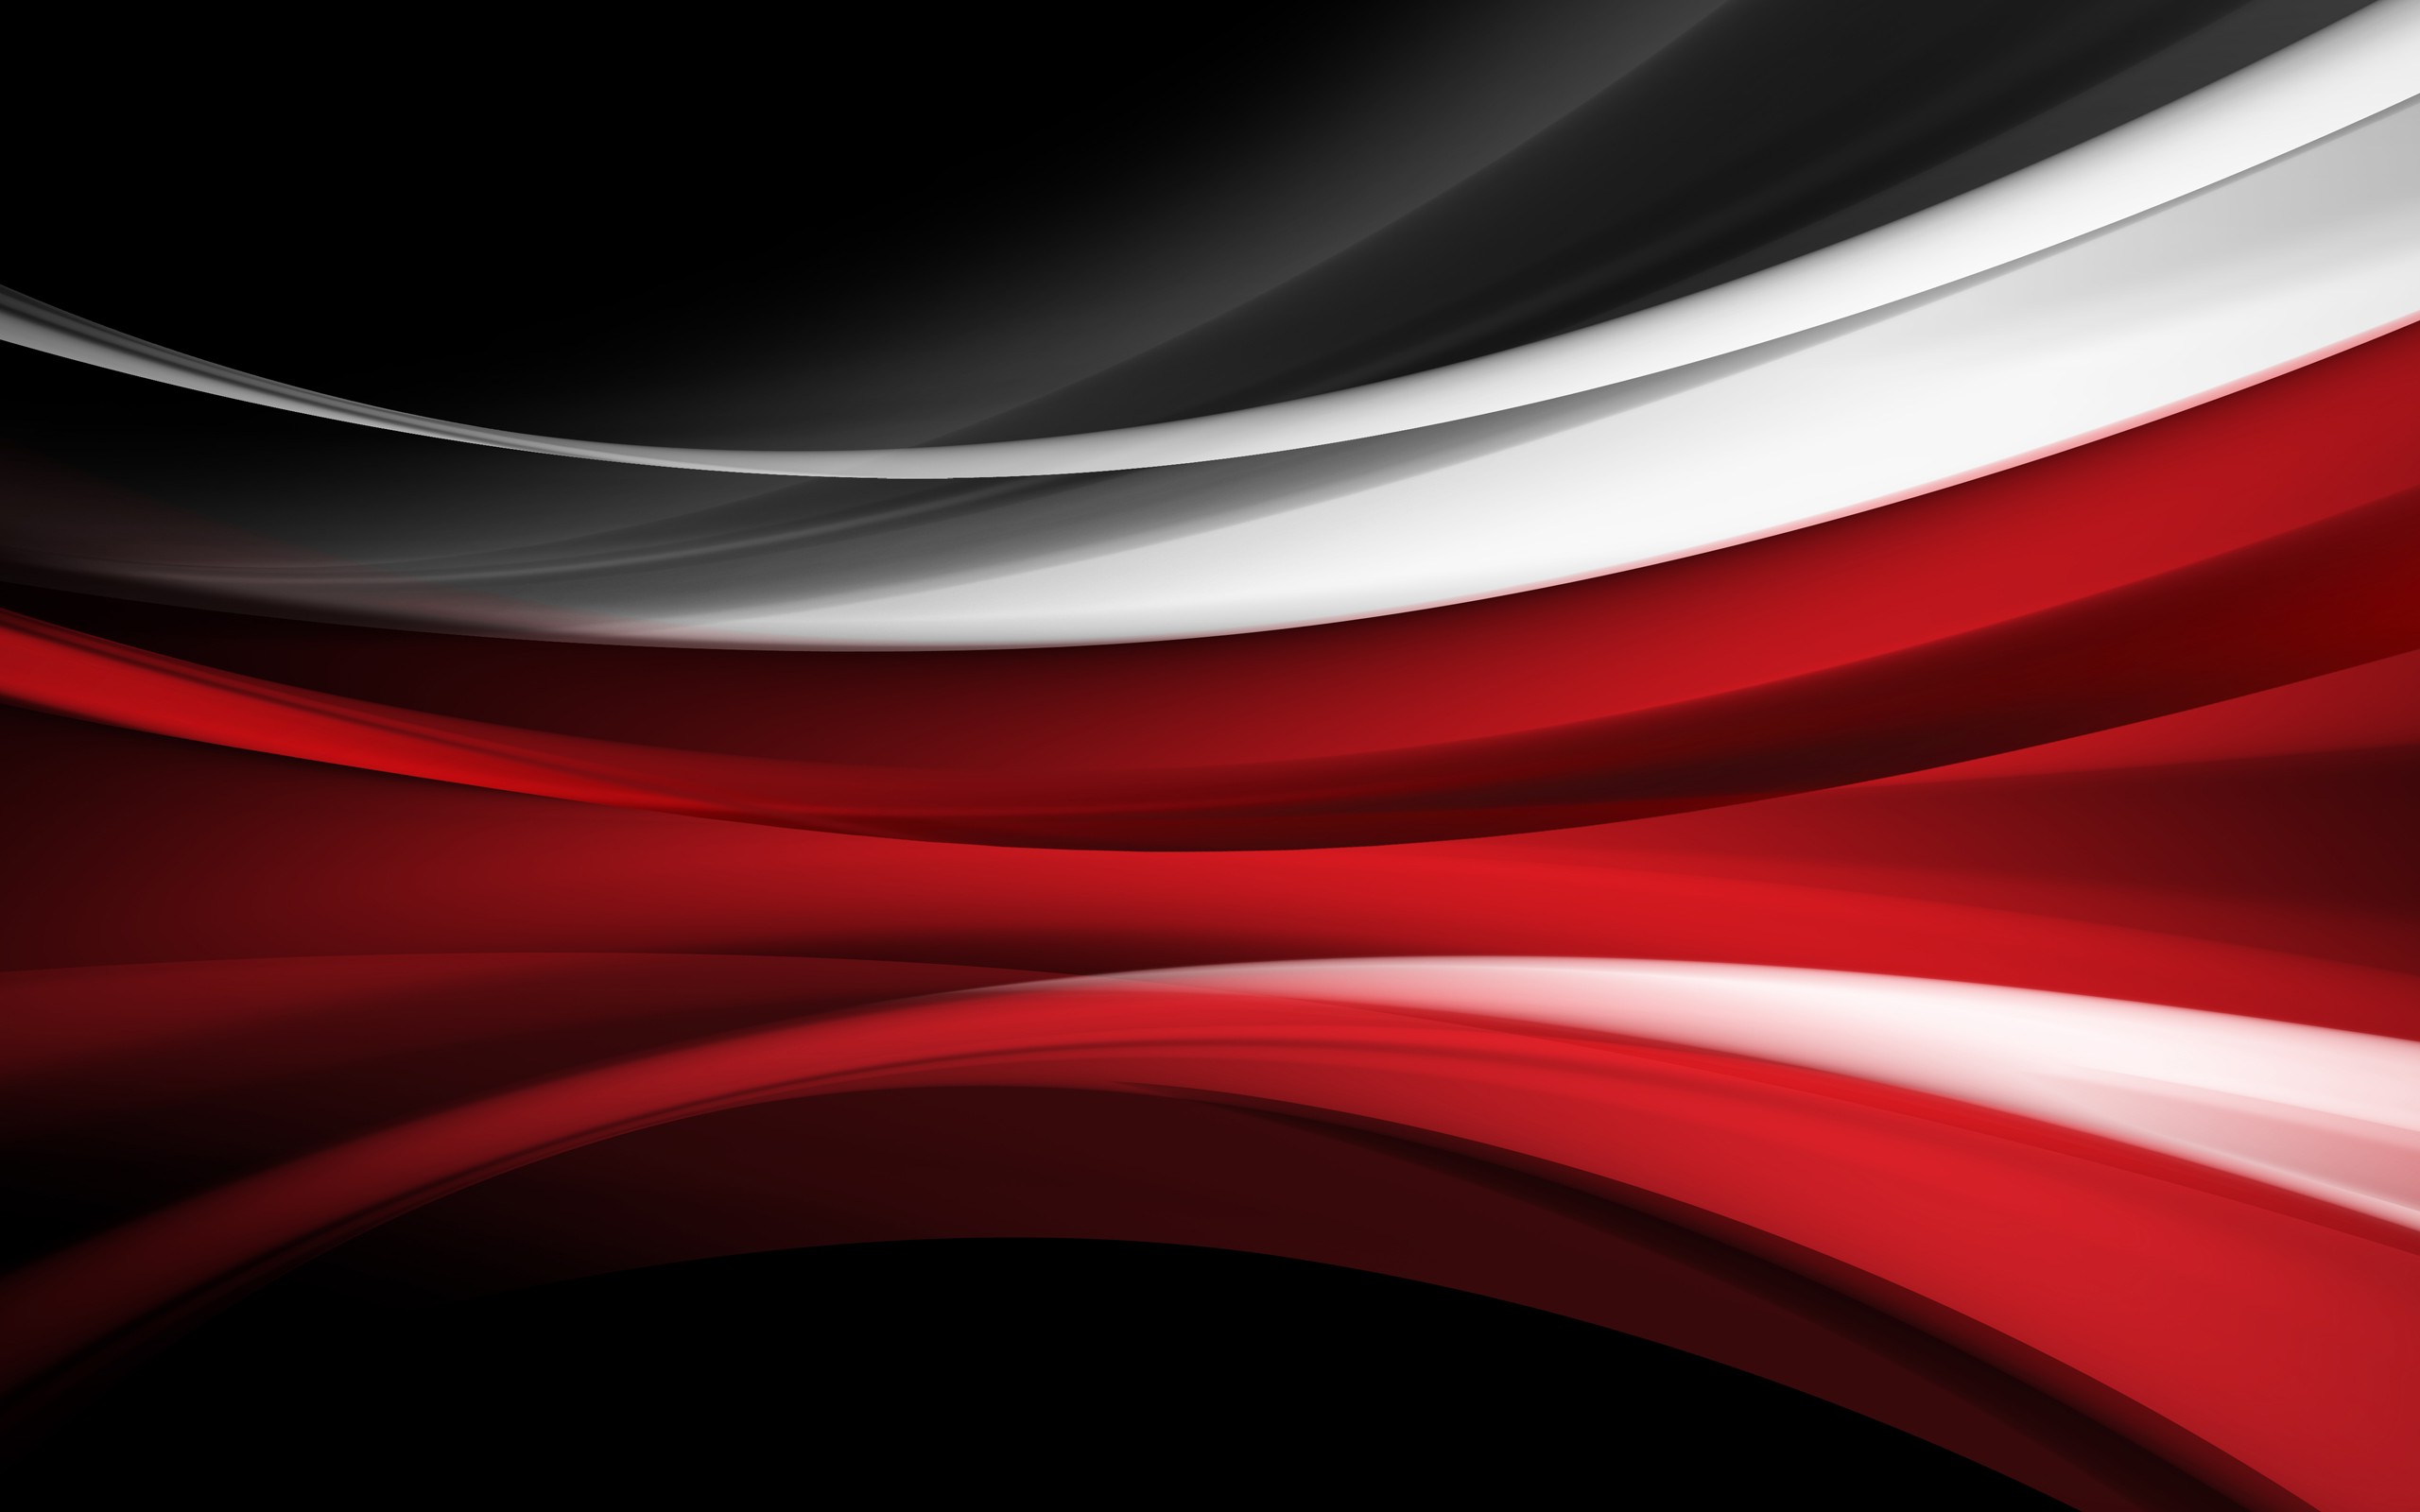 Wallpaper, 2560x1600 px, abstract, red, stripes, vector art 2560x1600